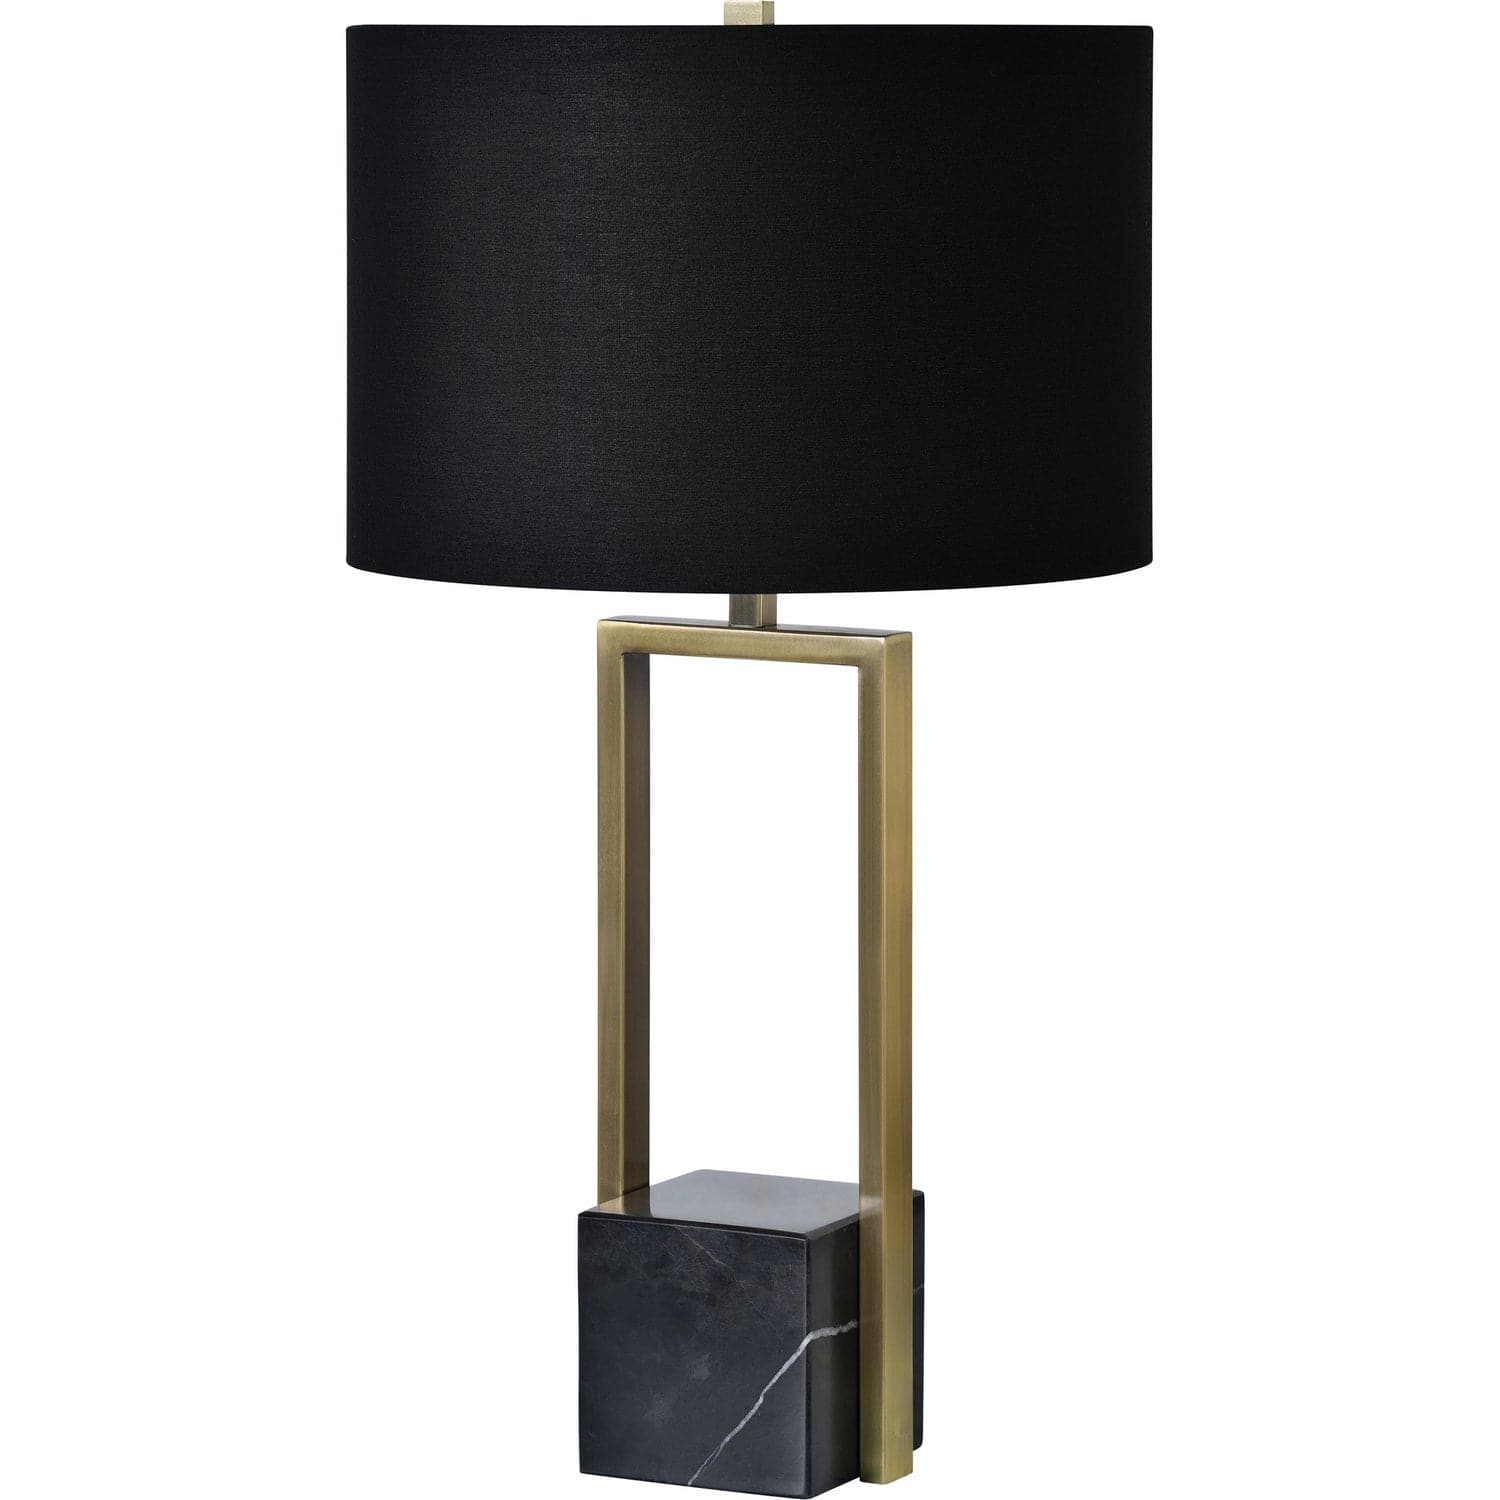 Renwil - LPT1188 - One Light Table Lamp - Arla - Natural Black,Plated Antique Brushed Brass,Black